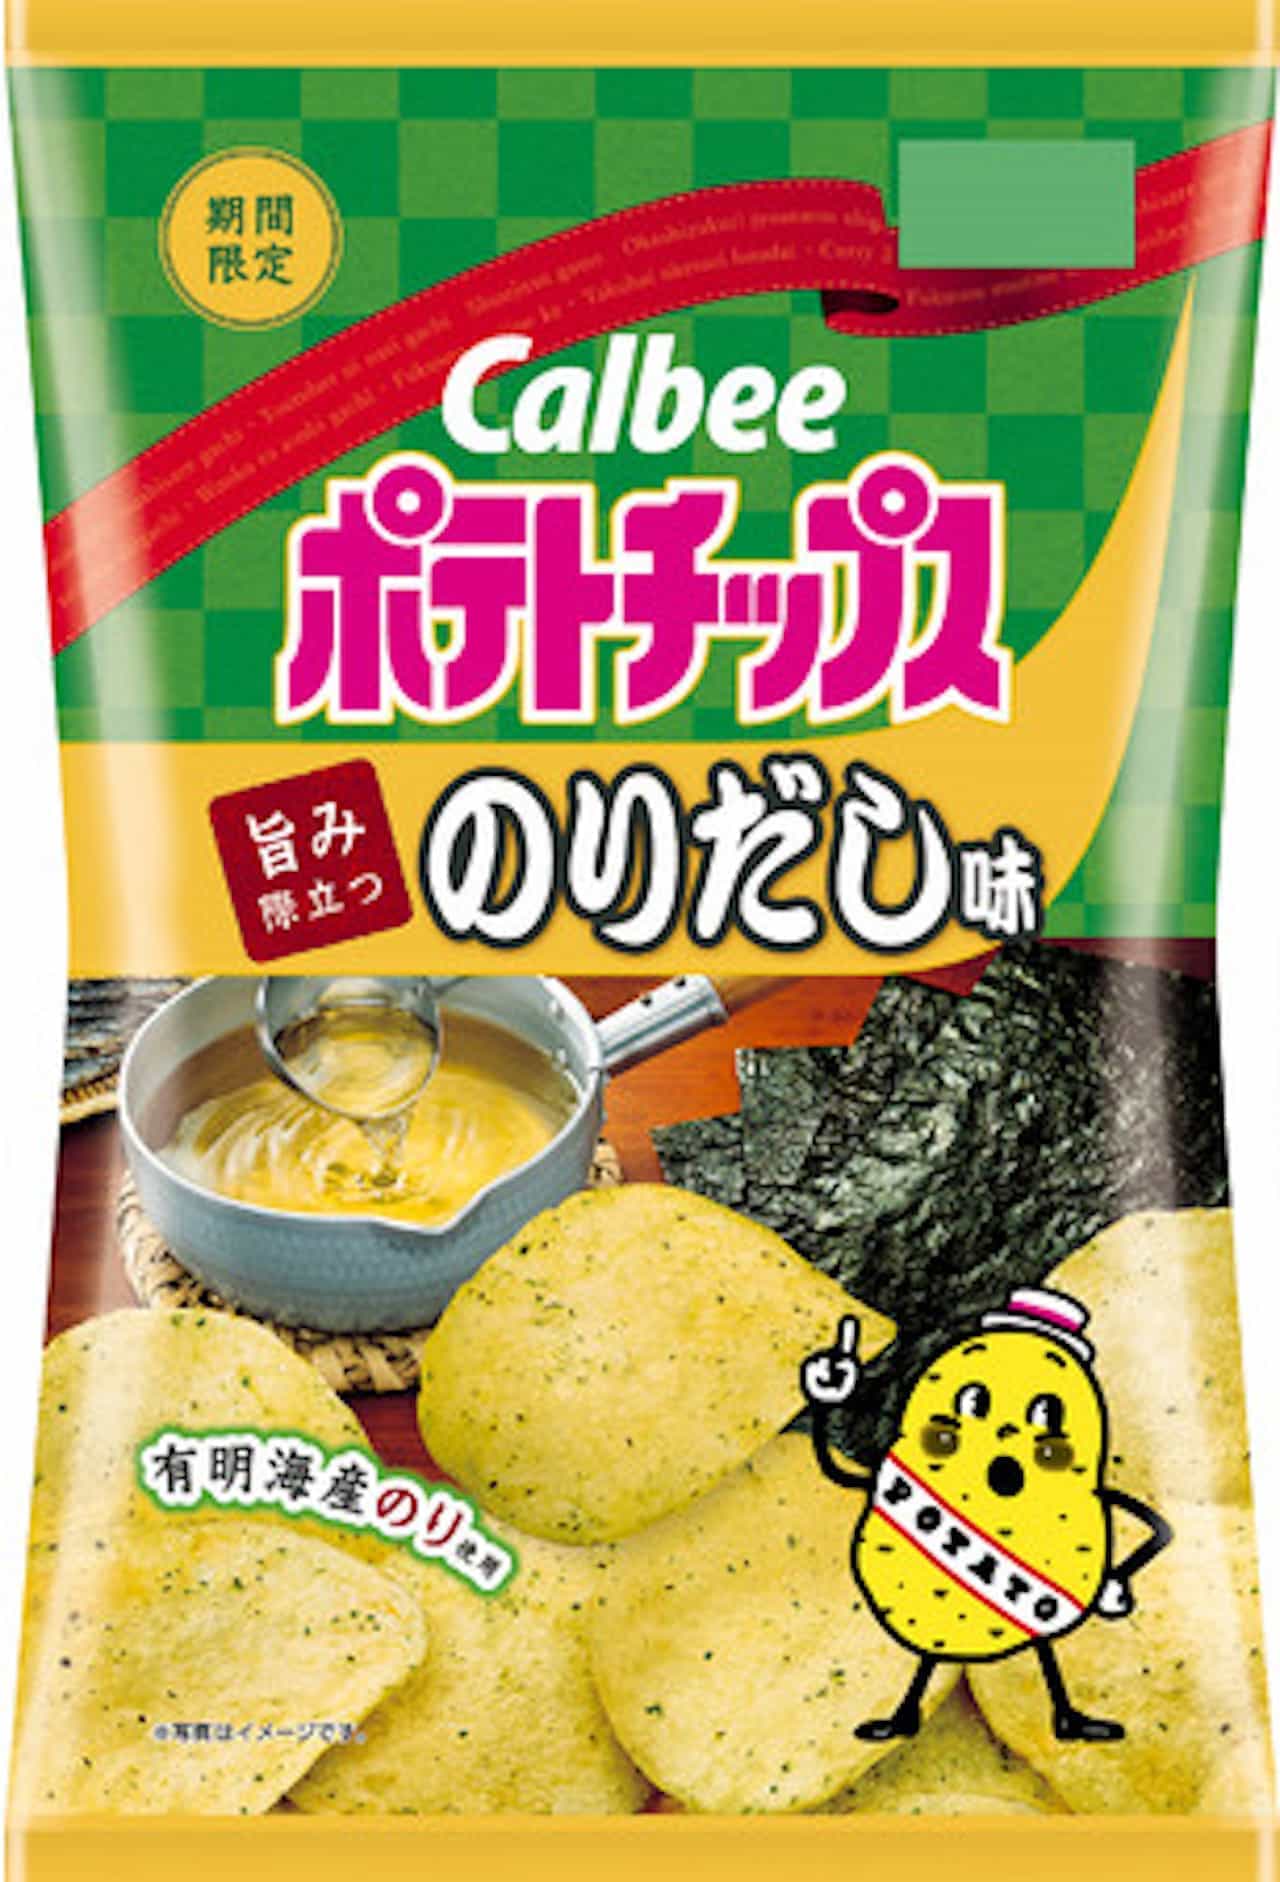 "Potato chips with a distinctive umami flavor" Convenience store only